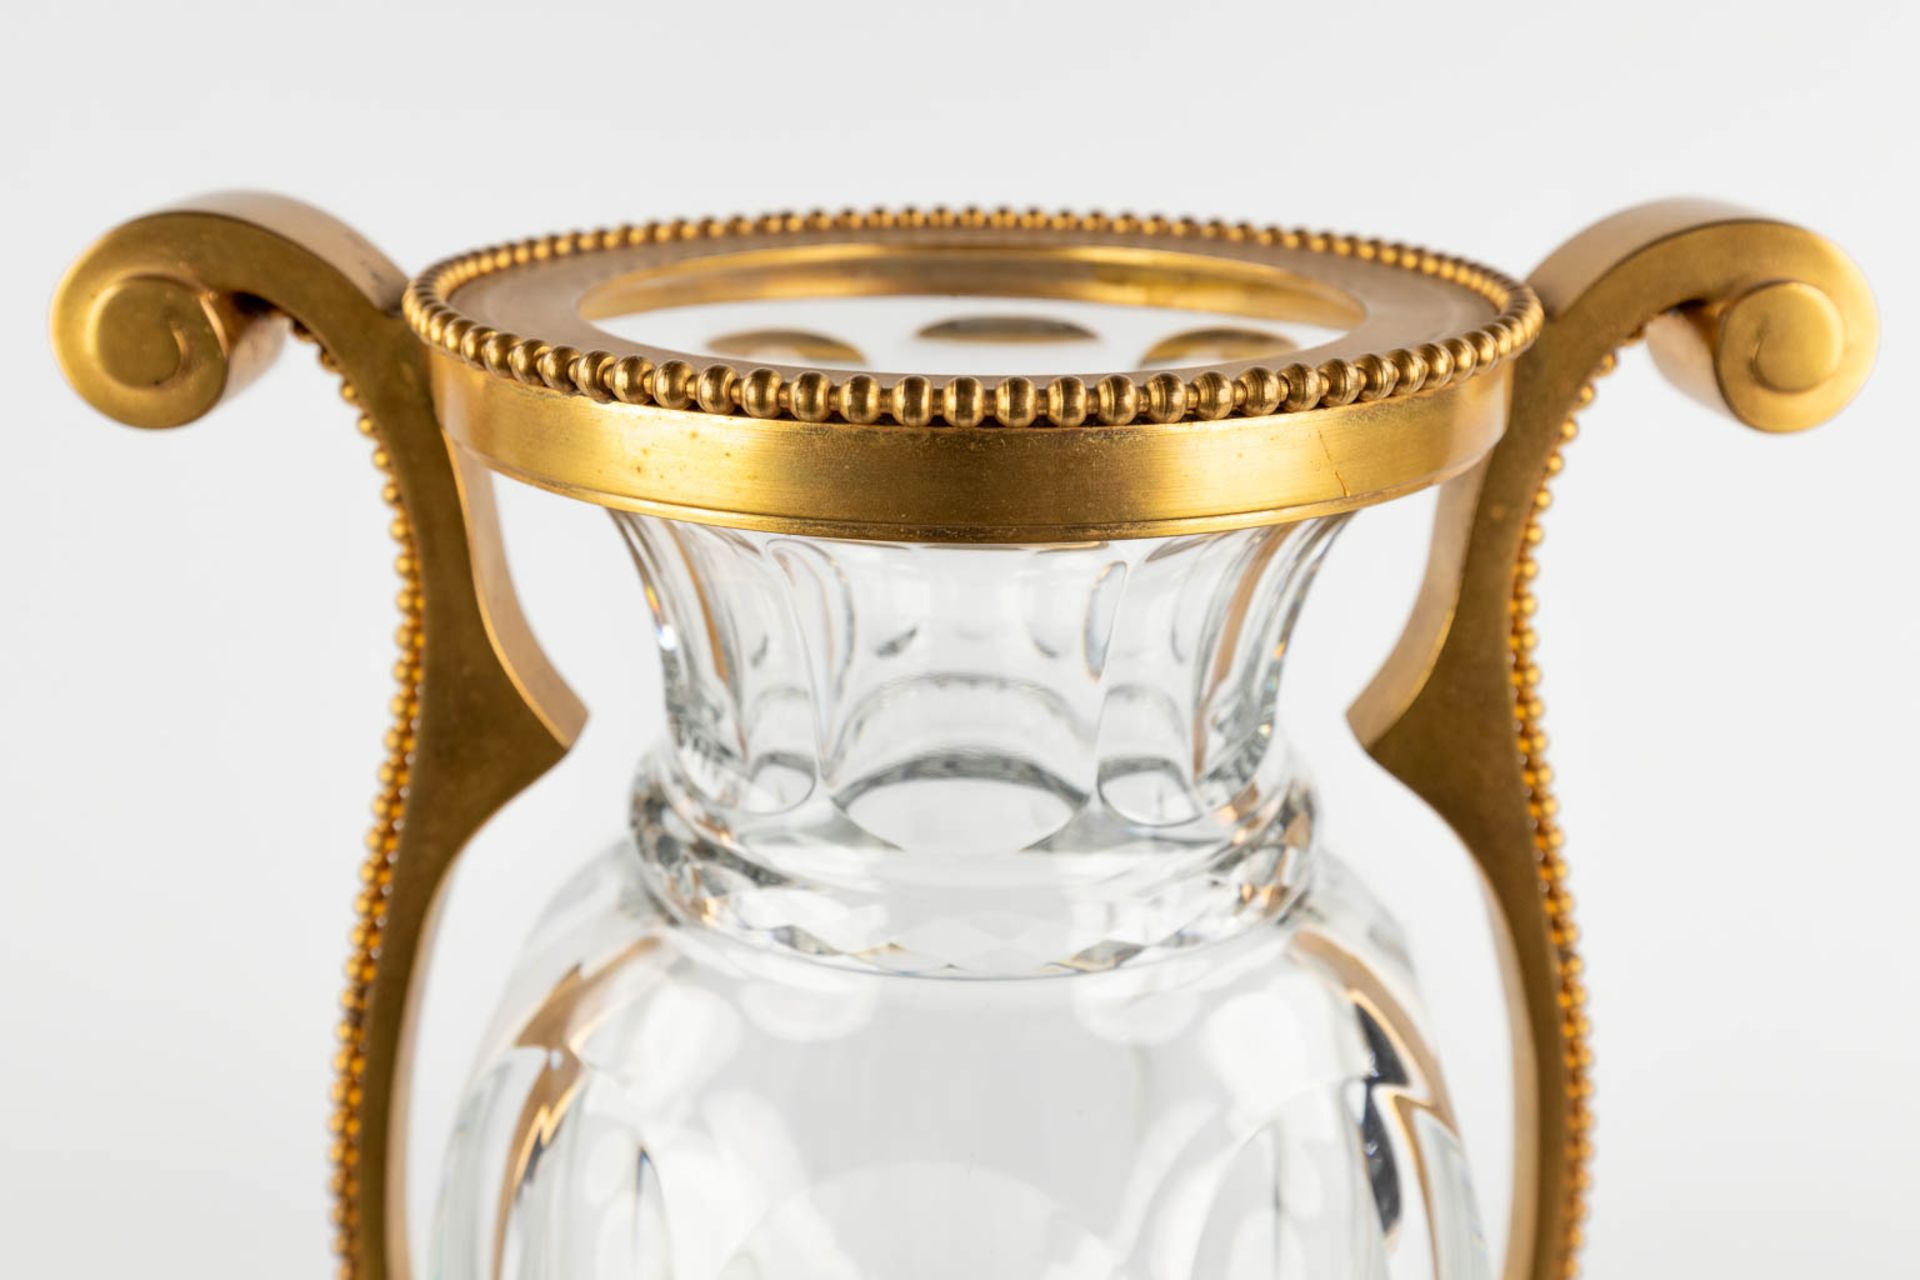 Baccarat, a large crystal vase mounted with gilt bronze. 20th C. (D:14 x W:22 x H:38,5 cm) - Image 10 of 12